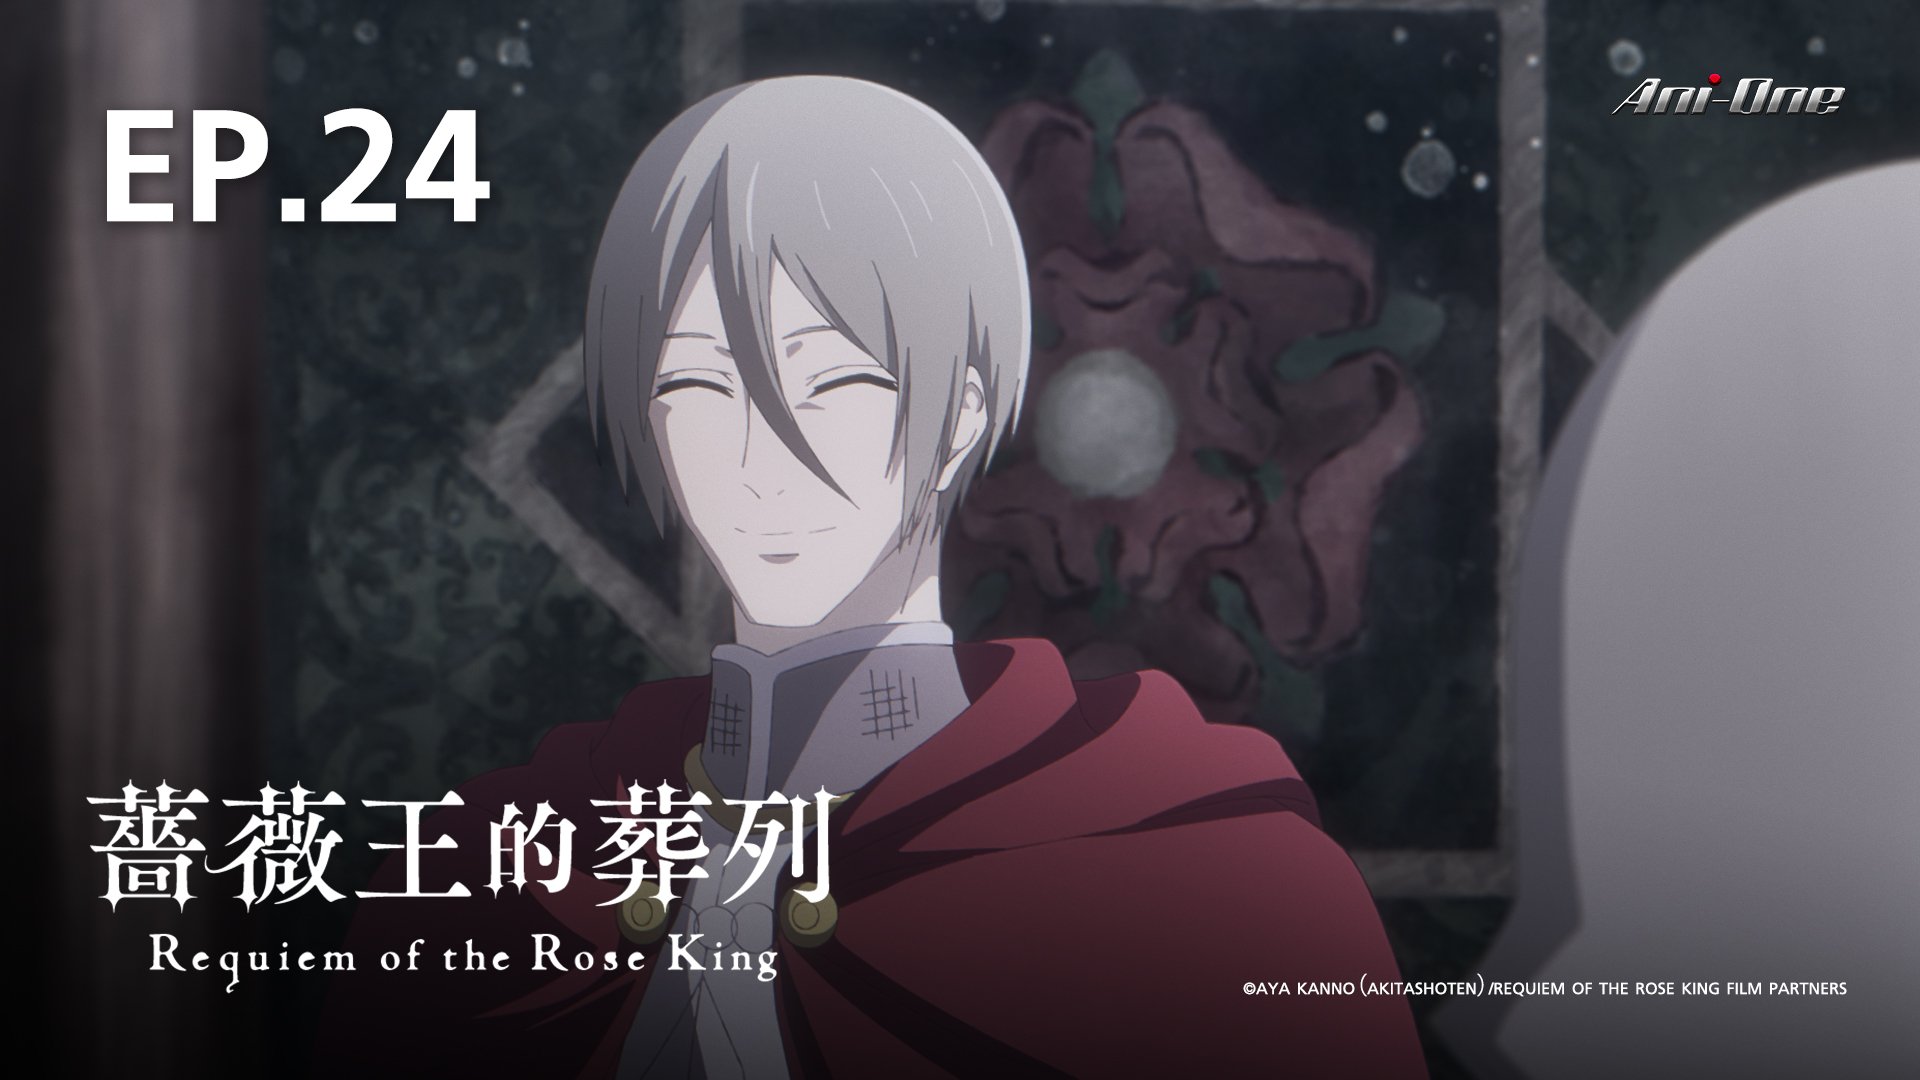 Requiem of the Rose King Anime Series Episodes 1-24